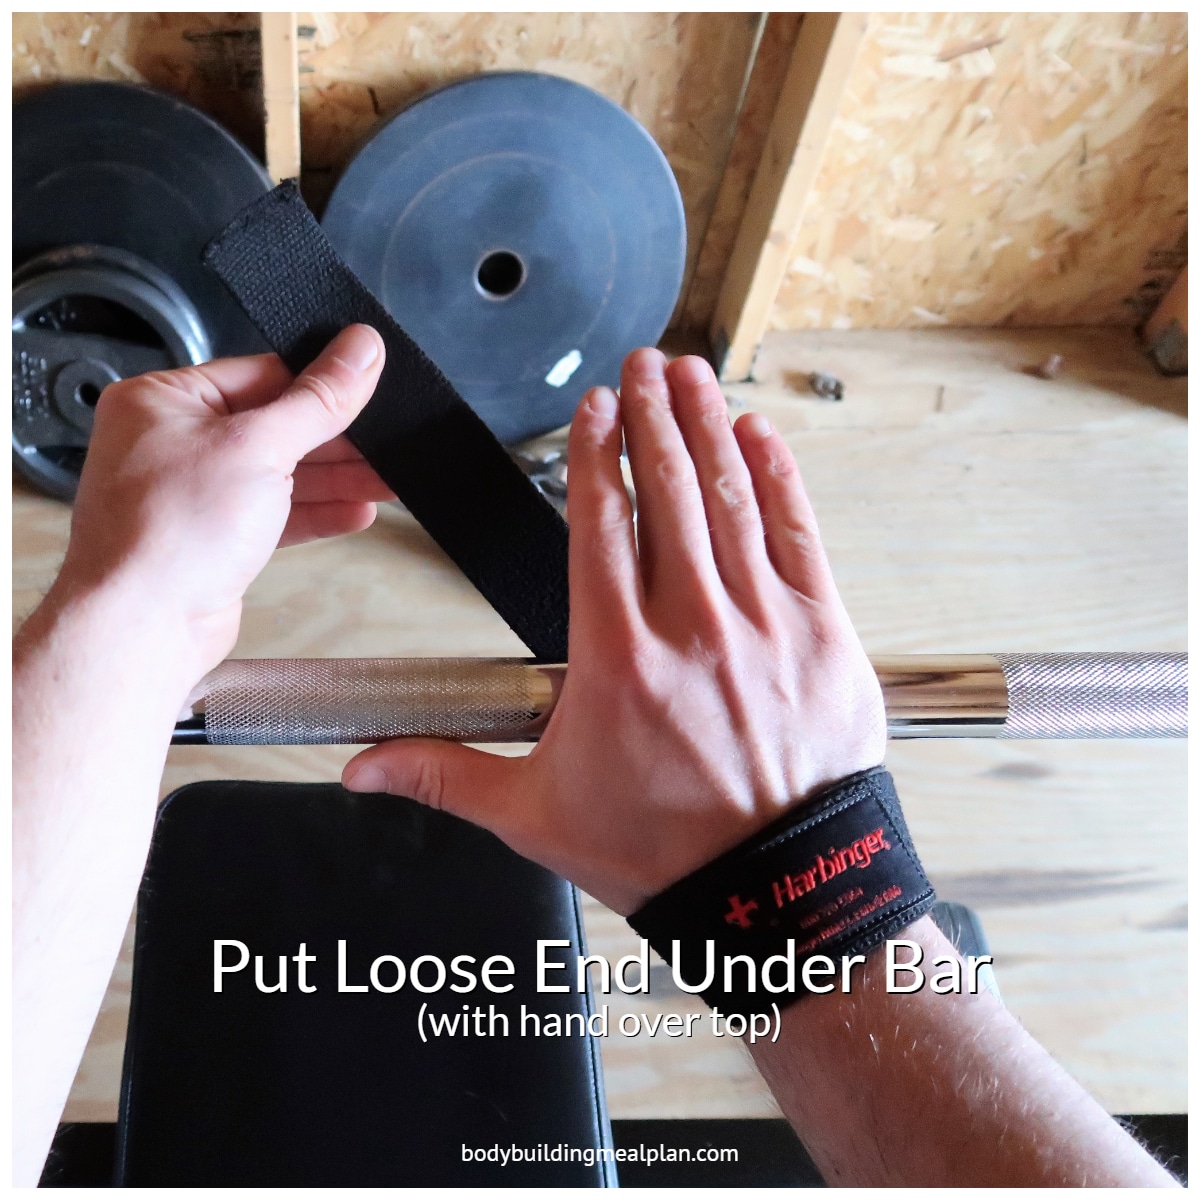 How To Use Lifting Straps: 5 Easy Steps To Lift More Weight